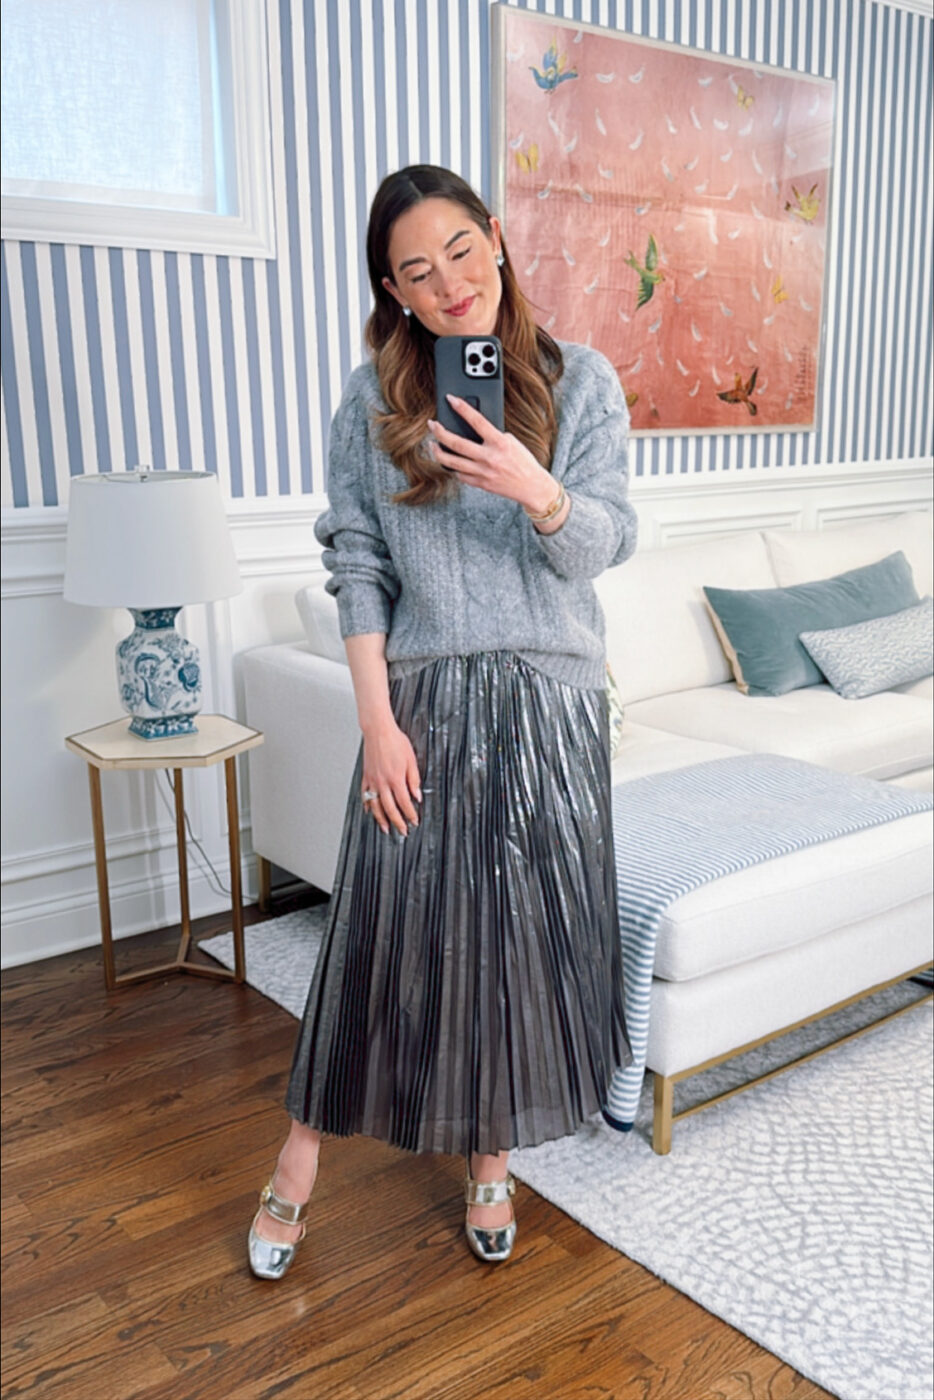 Shop our metallic bubble skirt in store today louannabrand    Available in Gold  Silver  Skirt8500  Sizes SML  Visit our   Instagram